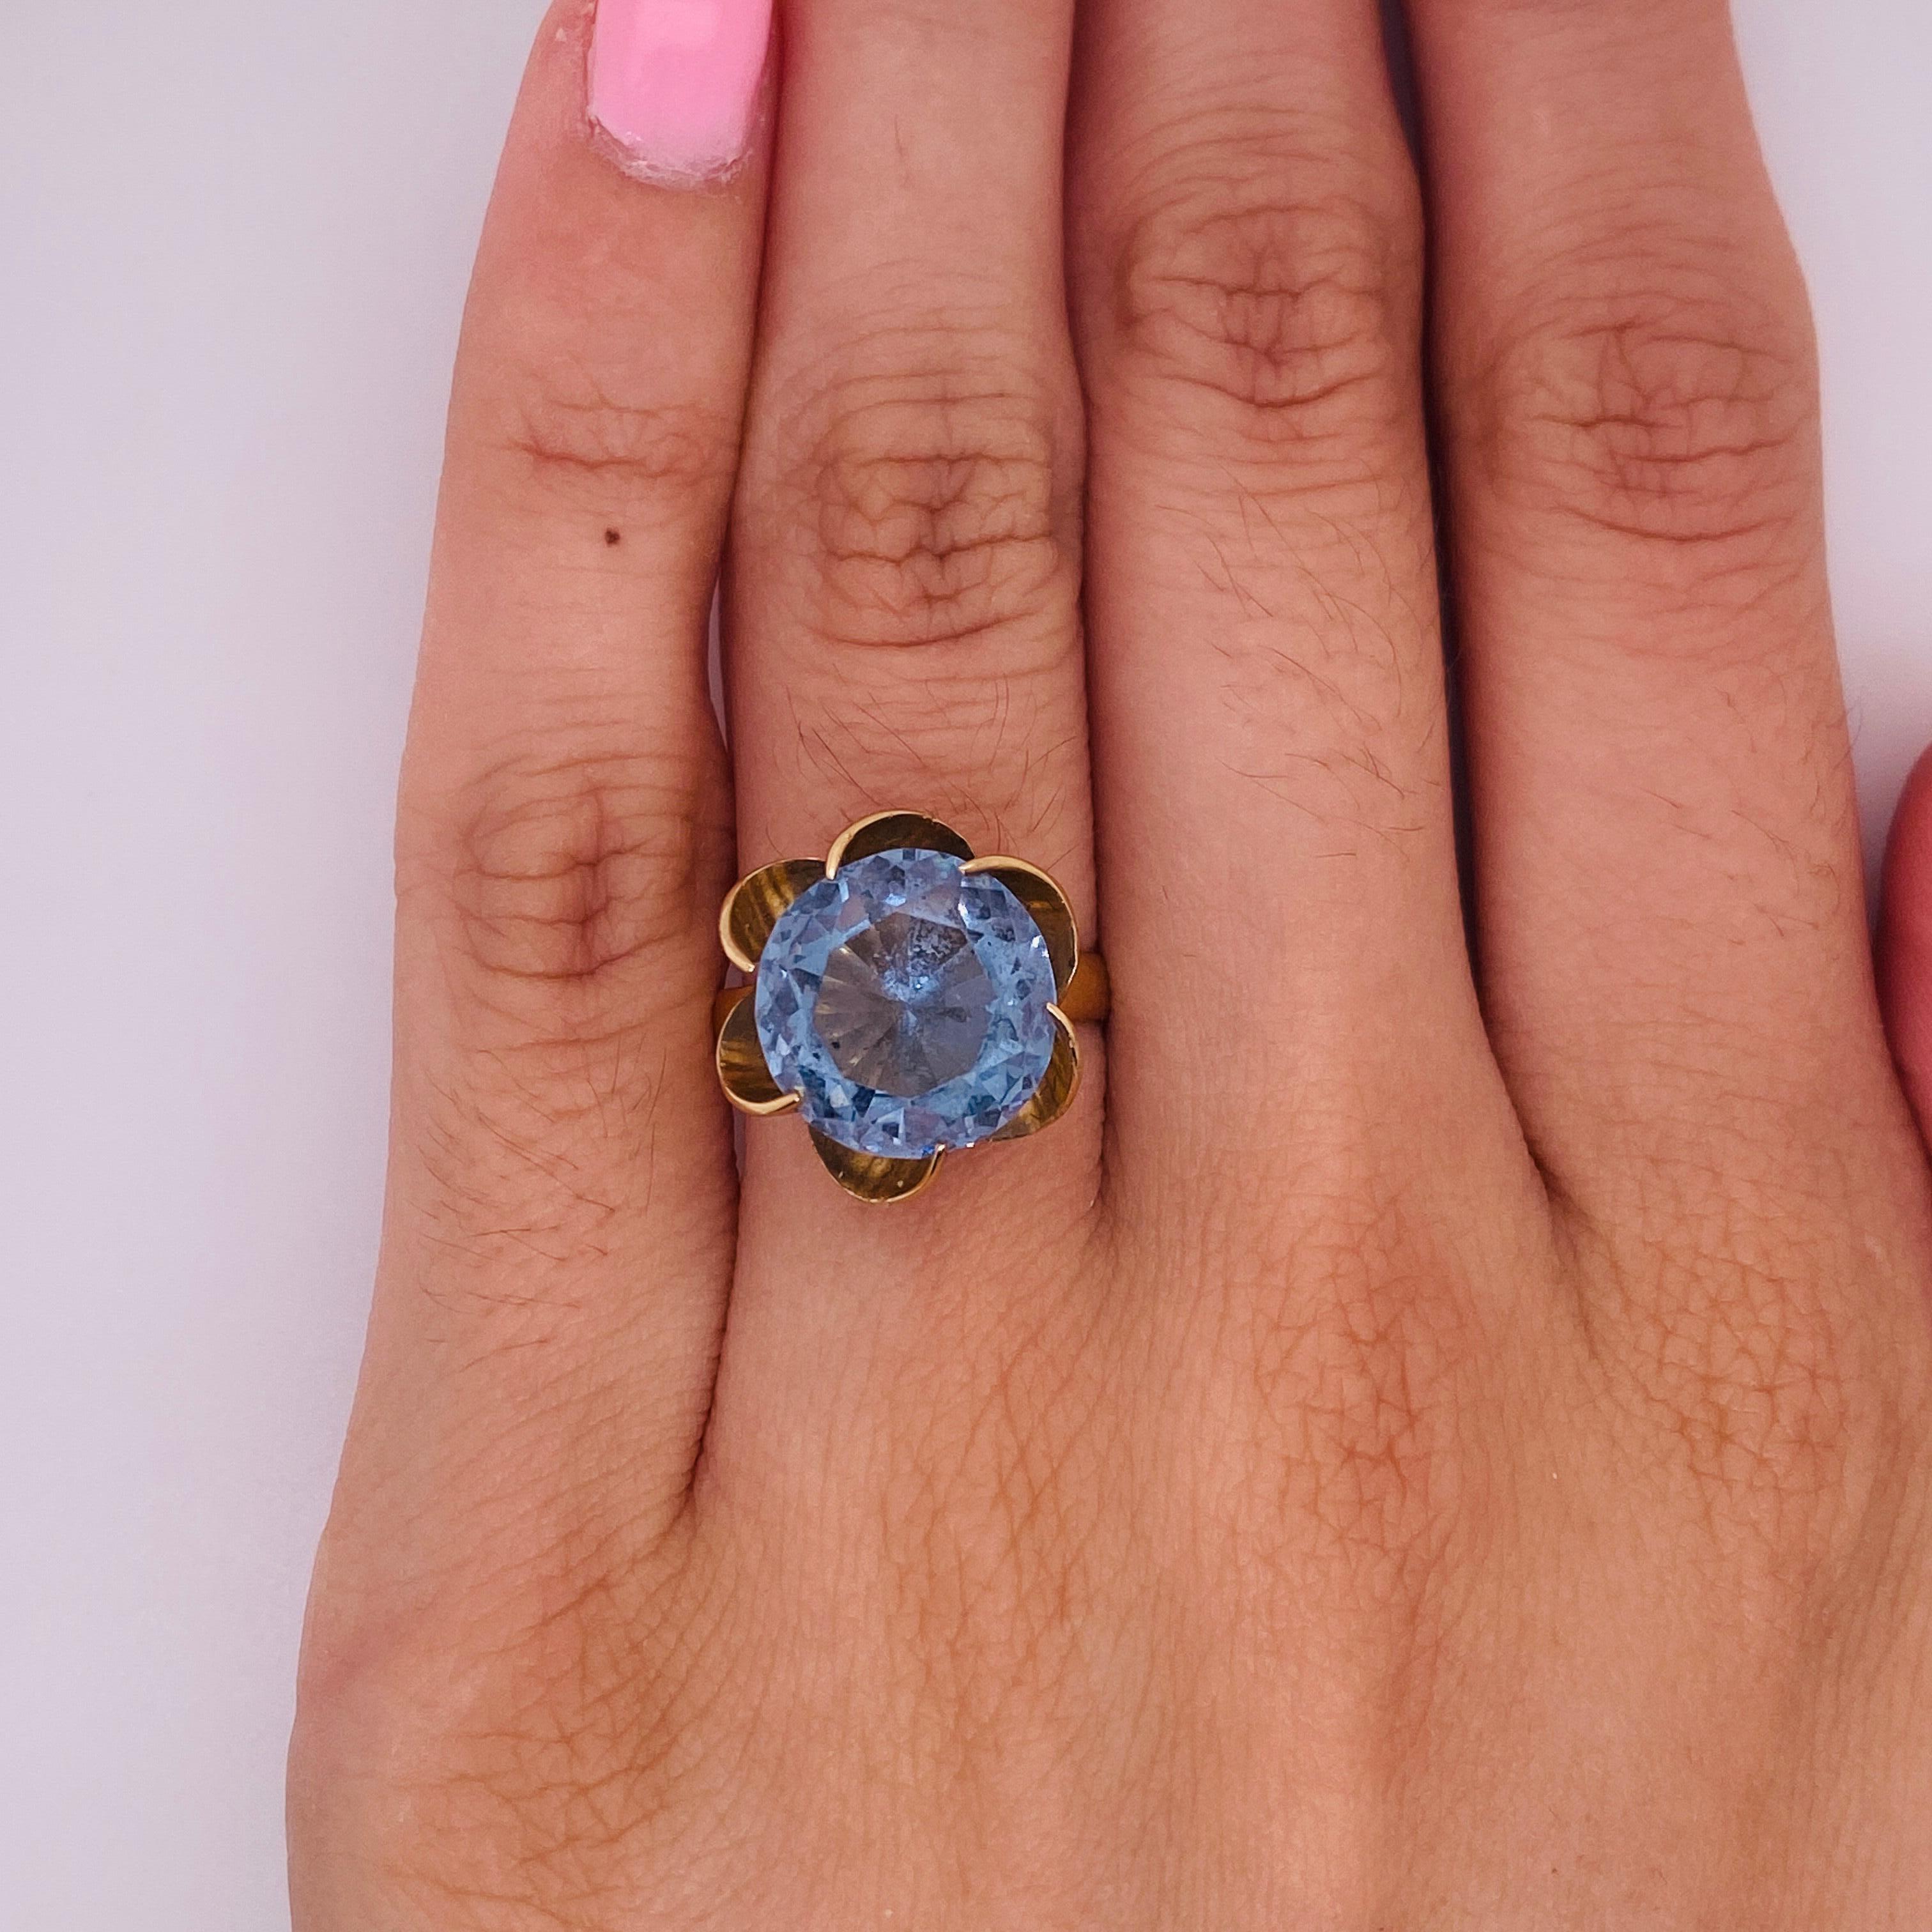 Adorn a magnificent finger with this gorgeous 6.60 carat Swiss blue topaz wrapped in the sweeping petals of a stylish flower. Blue topaz is one of the December birthstones. Honor a special someone that was born in December (graduation, anniversary,